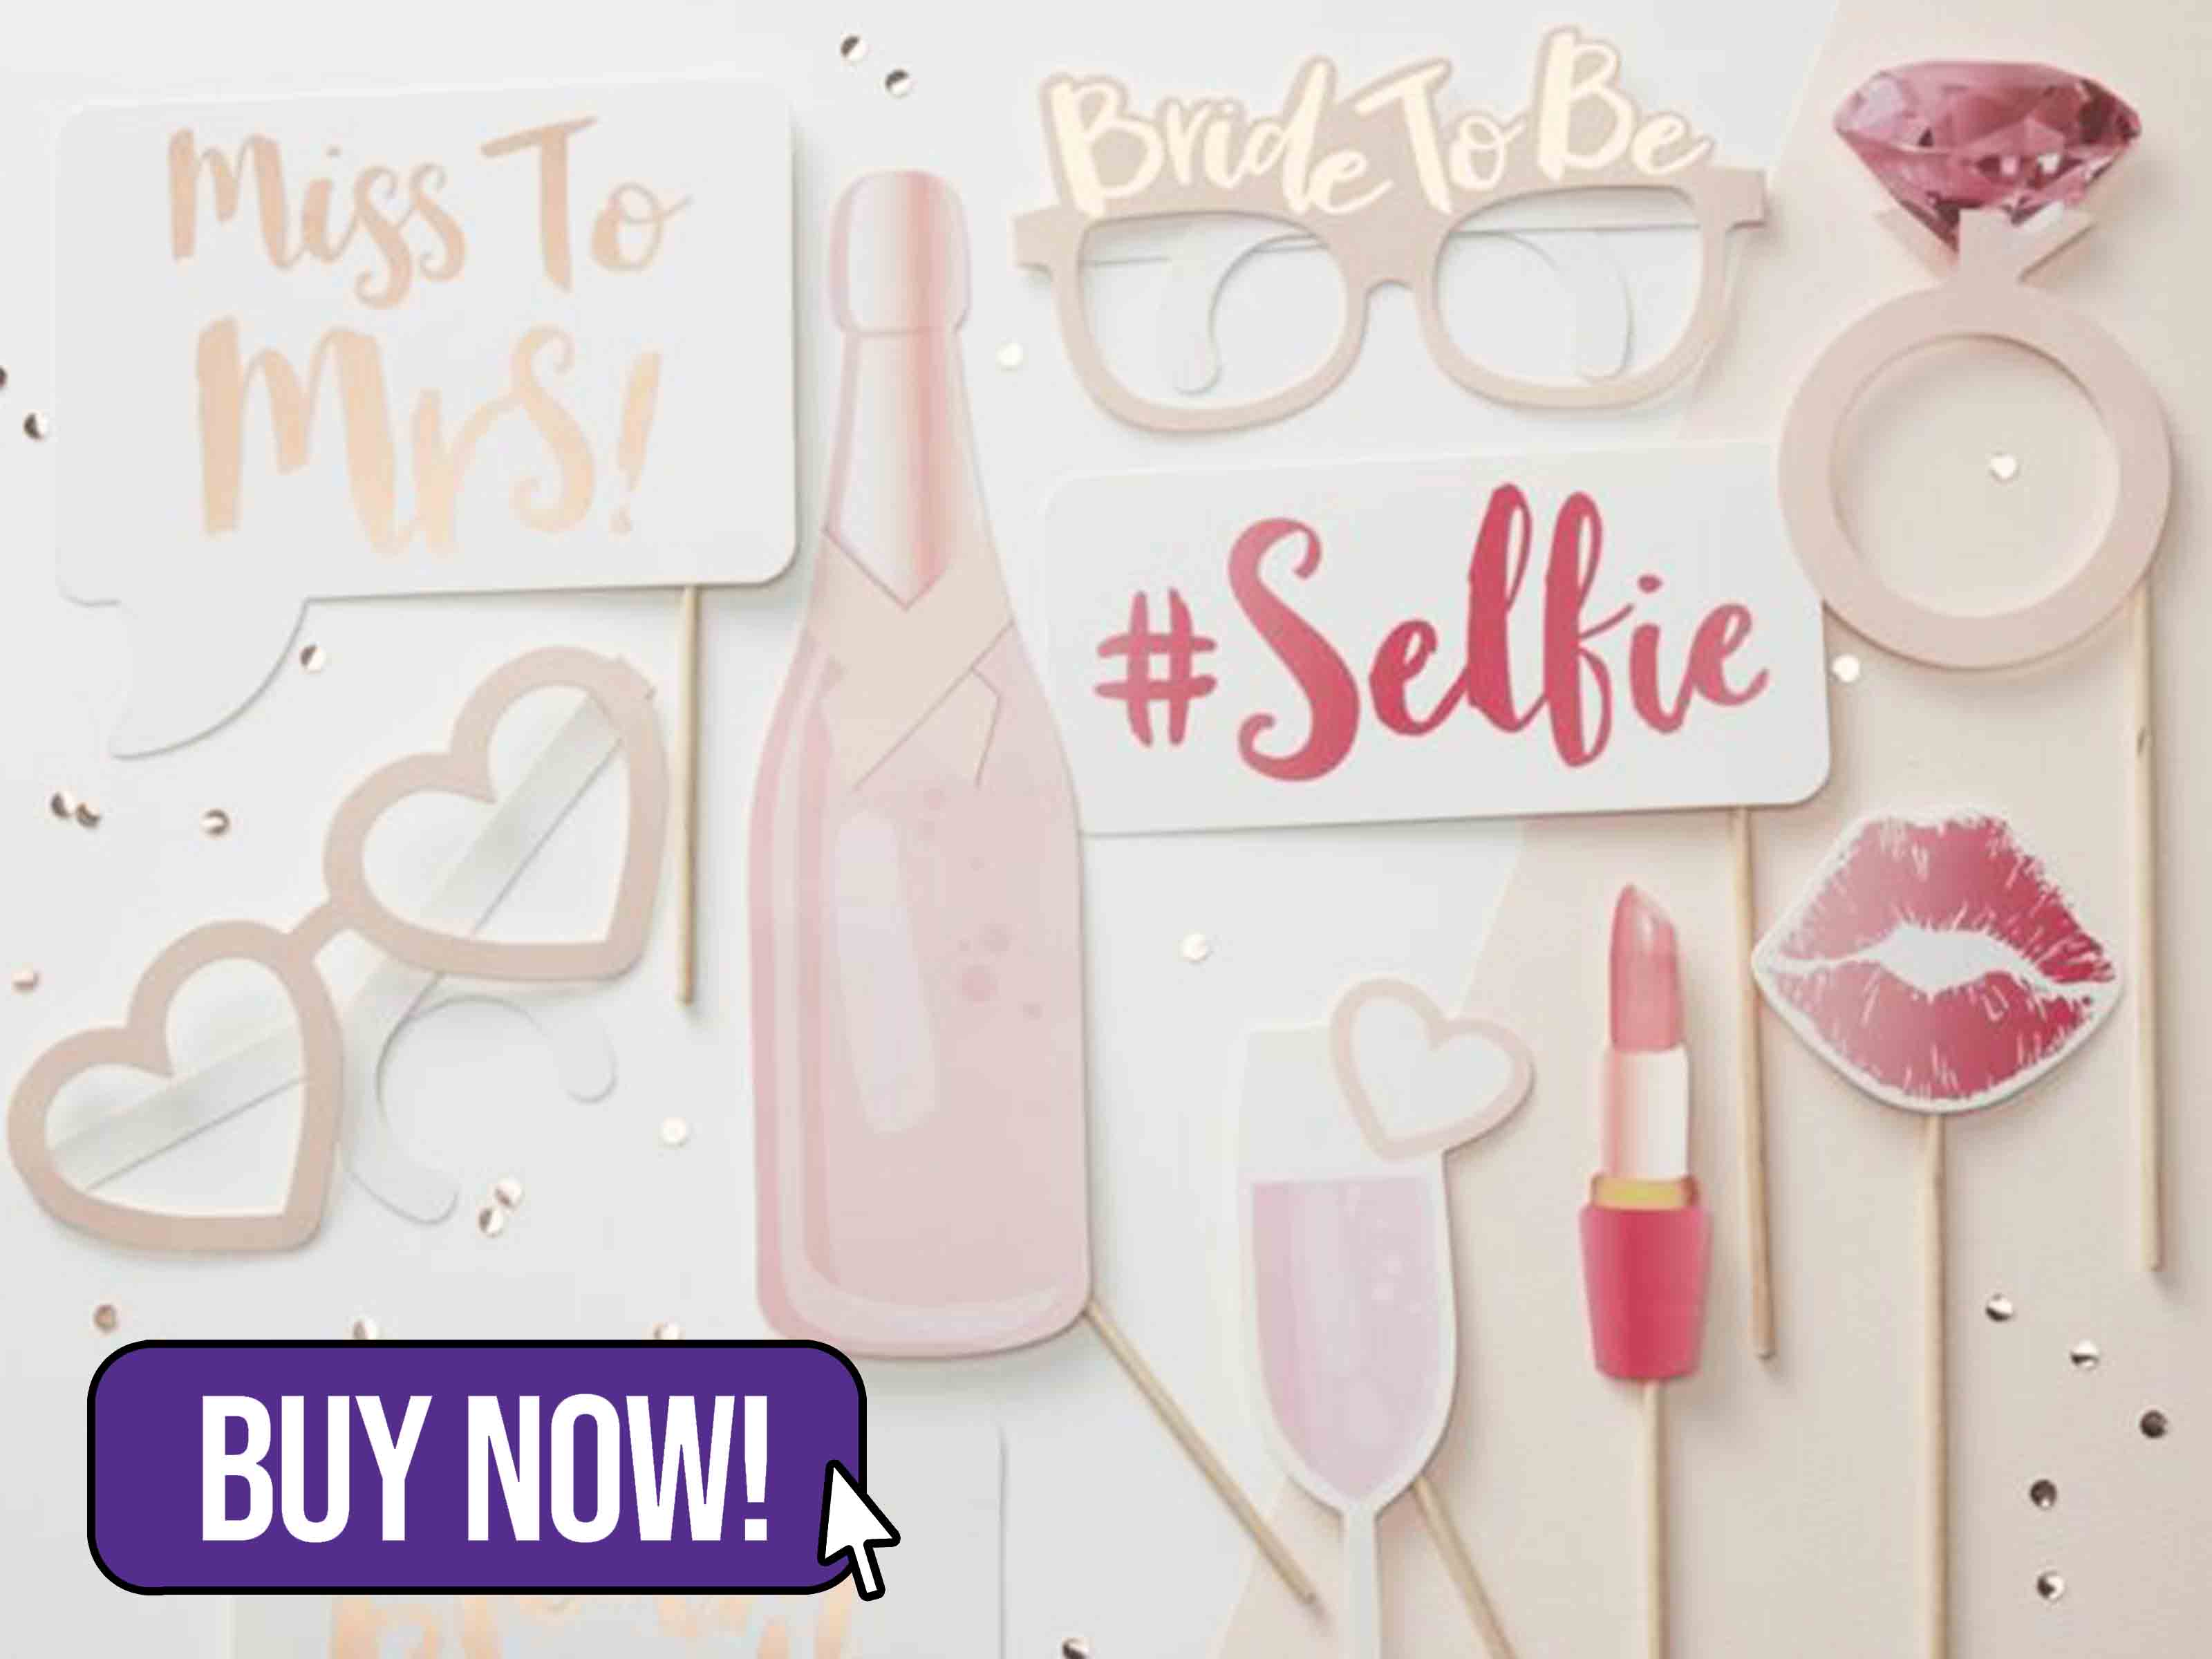 TEAM BRIDE HEN PARTY PHOTO BOOTH PROPS - Ginger Ray